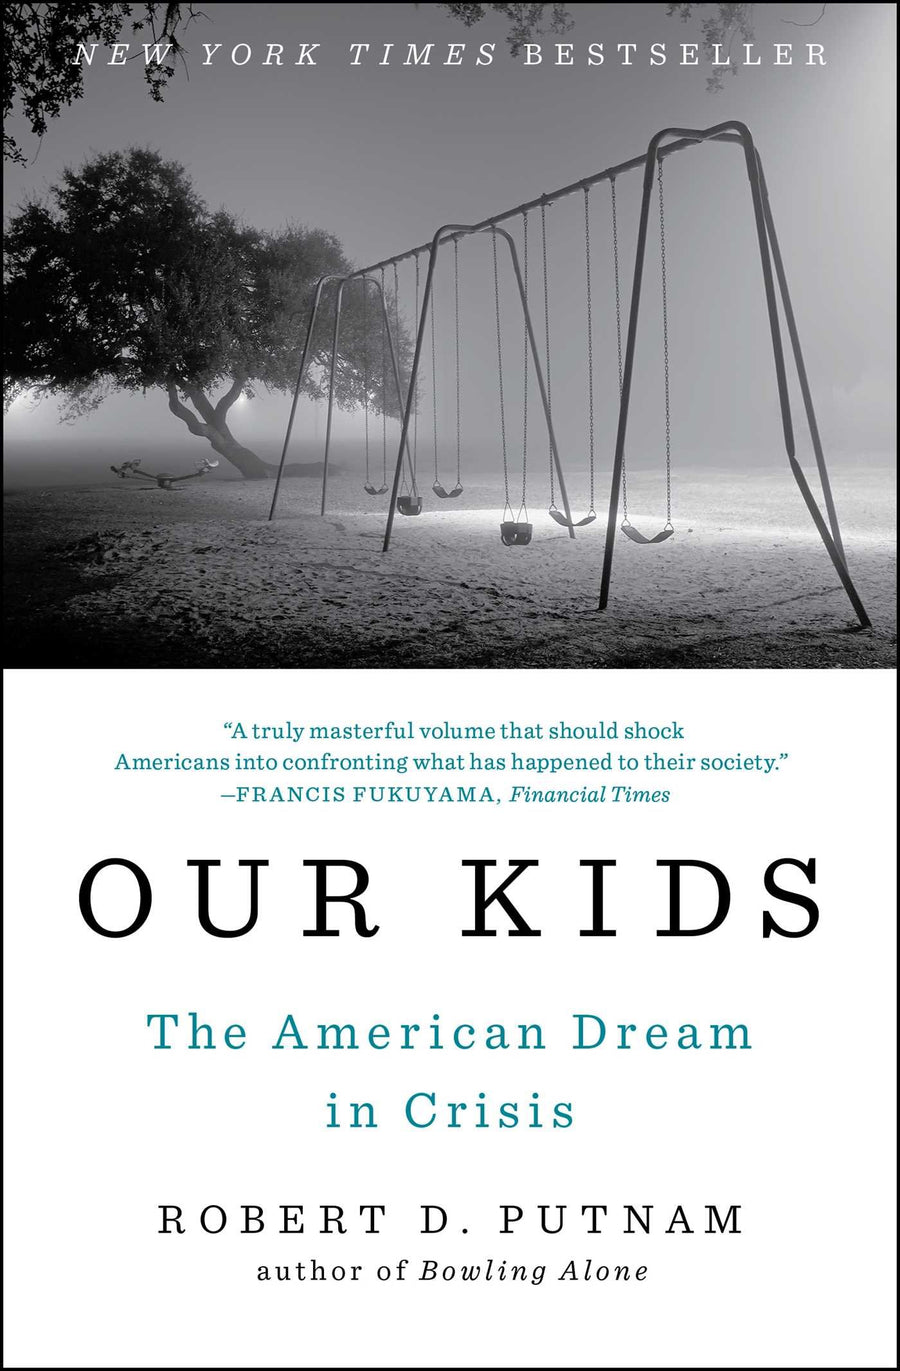 Our Kids: Narrowing the Opportunity Gap 4-Part Series Complete Set with Our Kids: The American Dream in Crisis by Dr. Robert D. Putnam (Home Use Only)